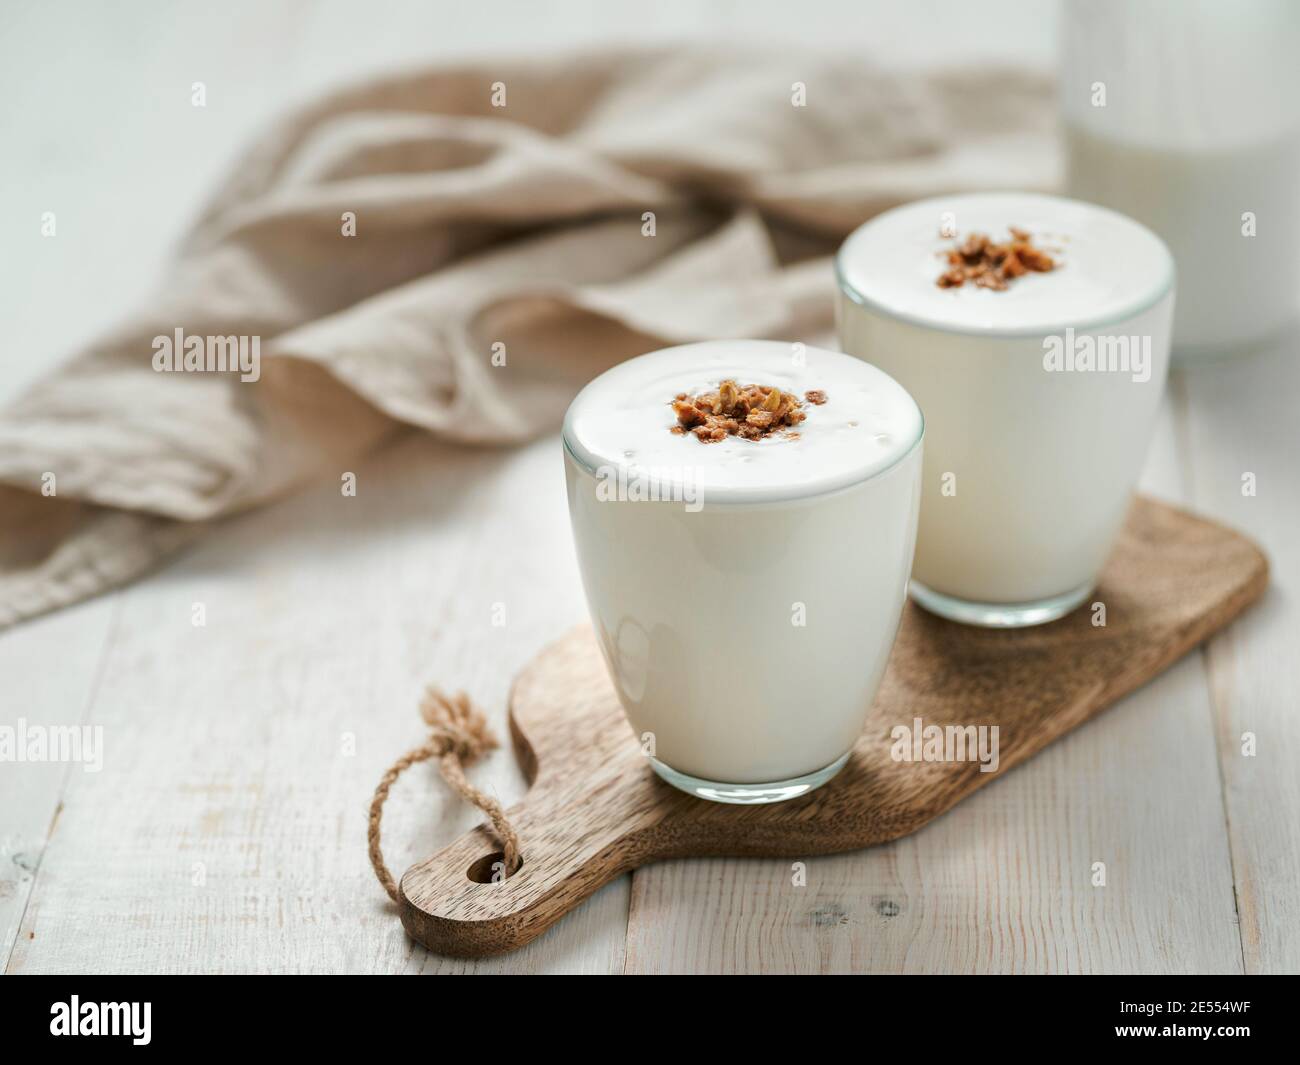 Kefir, buttermilk or yogurt with granola. Yogurt in glass on white wooden background. Probiotic cold fermented dairy drink. Gut health, fermented products, healthy gut flora concept. Copy space Stock Photo